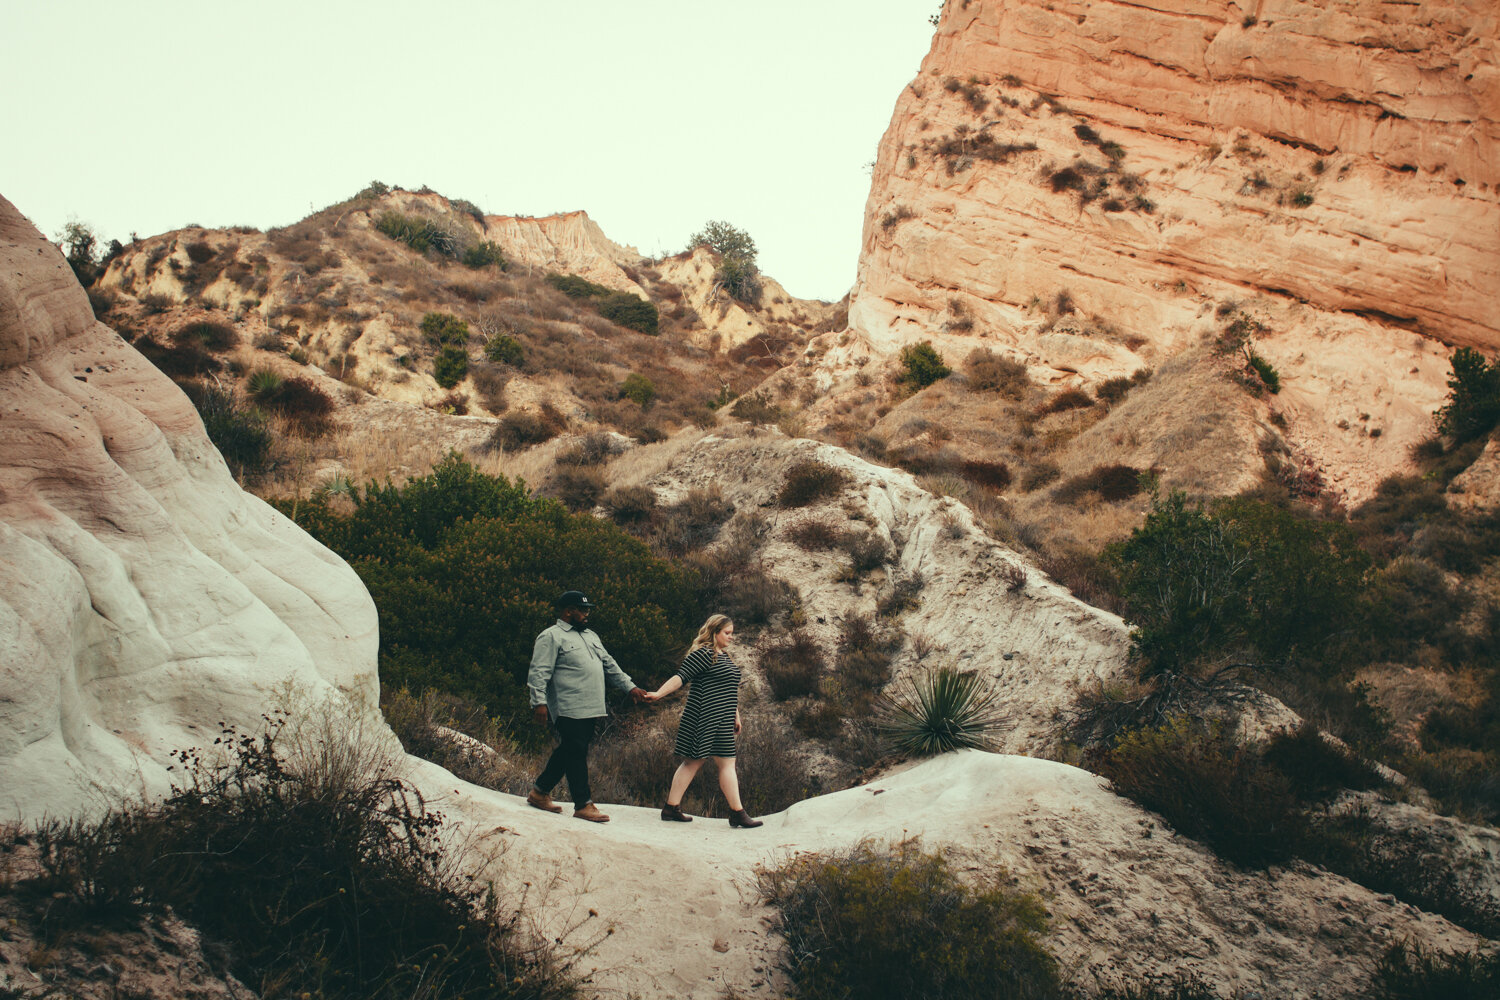 engagement engaged photography photographe marriage wedding photographer corse corsica california desert foothill ranch whiting lifestyle Anza Creative-30.jpg